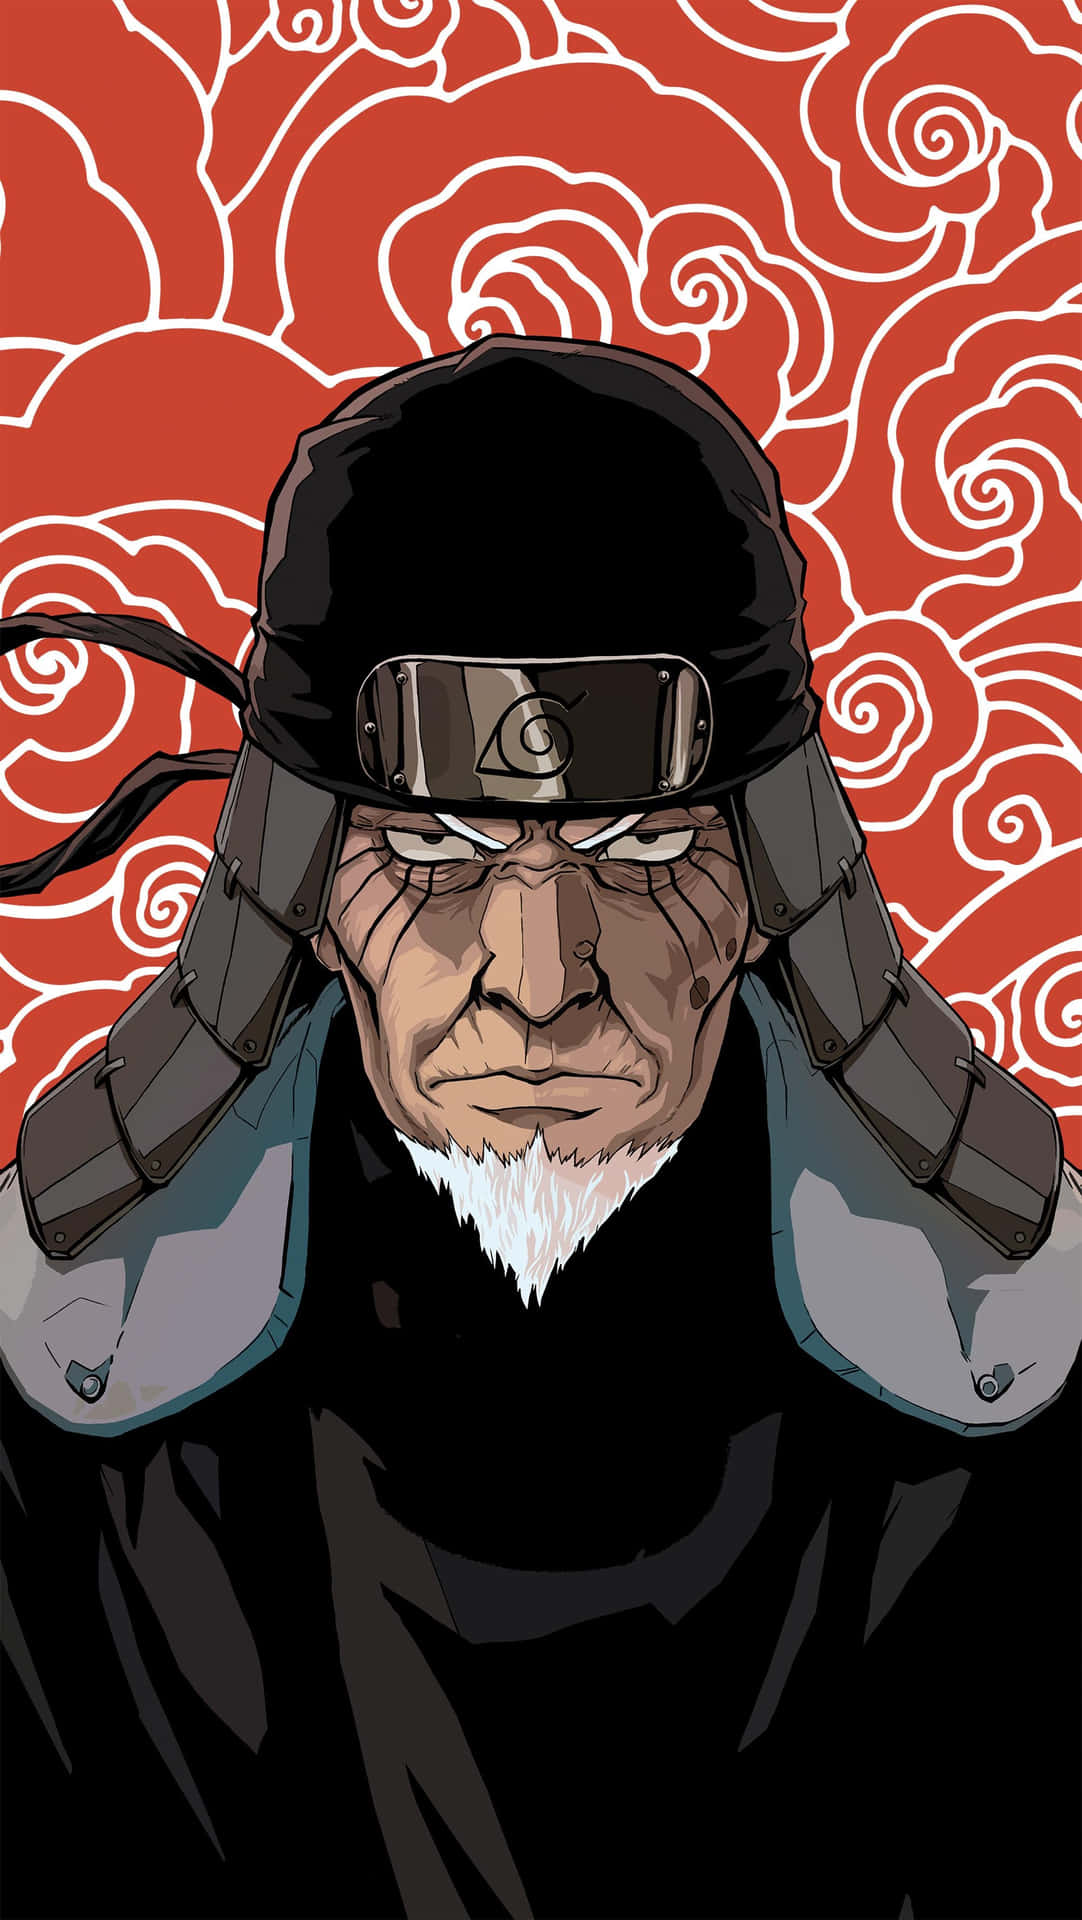 Third Hokage from the Naruto anime series standing confidently Wallpaper